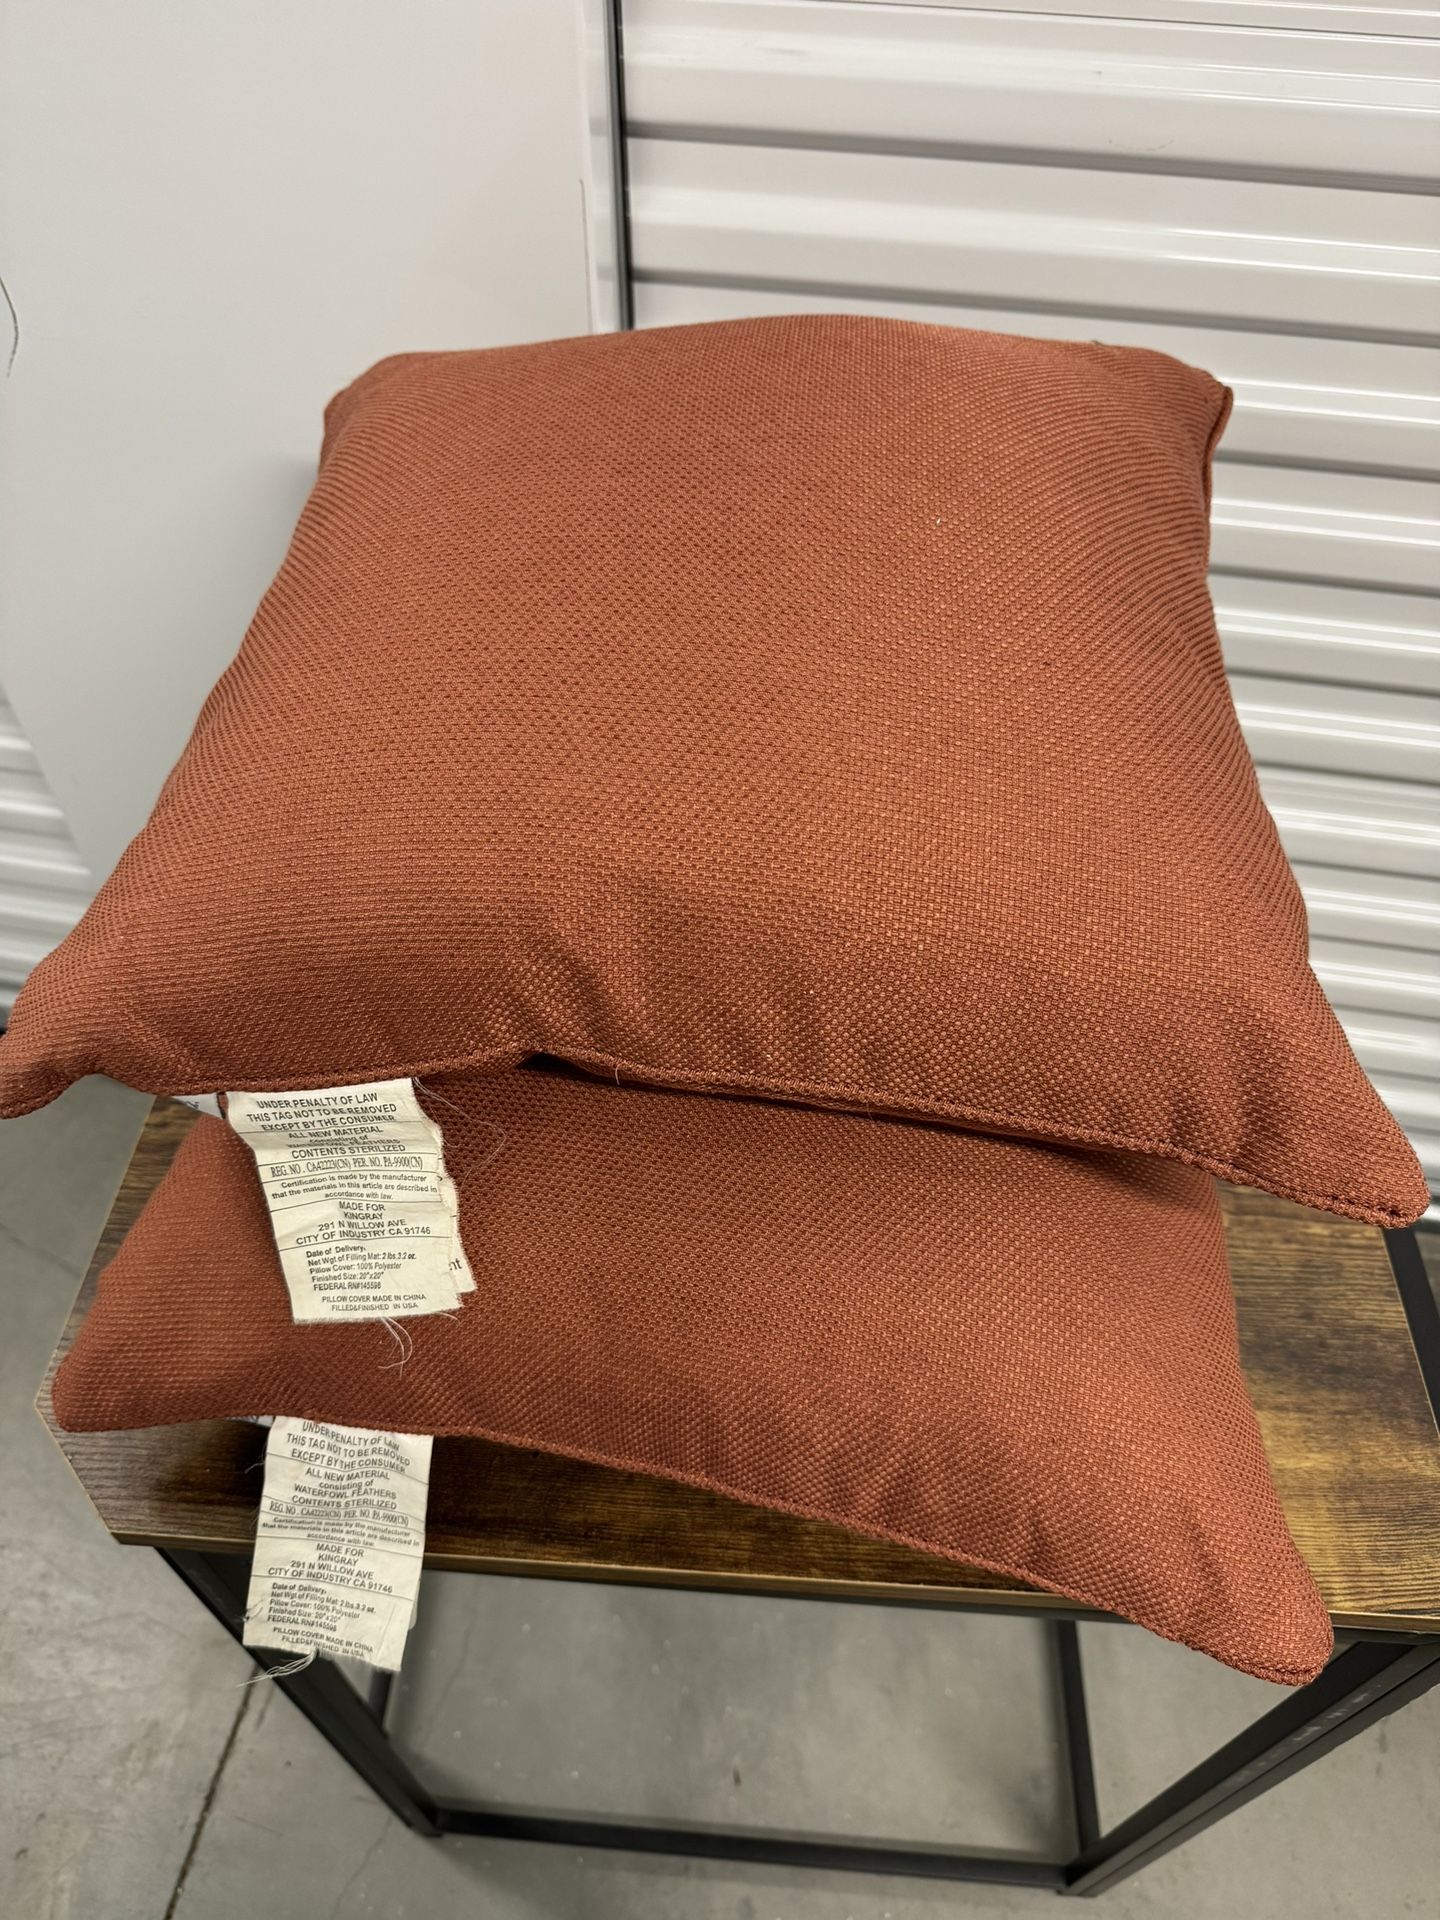 Two Burgundy Couch Pillows